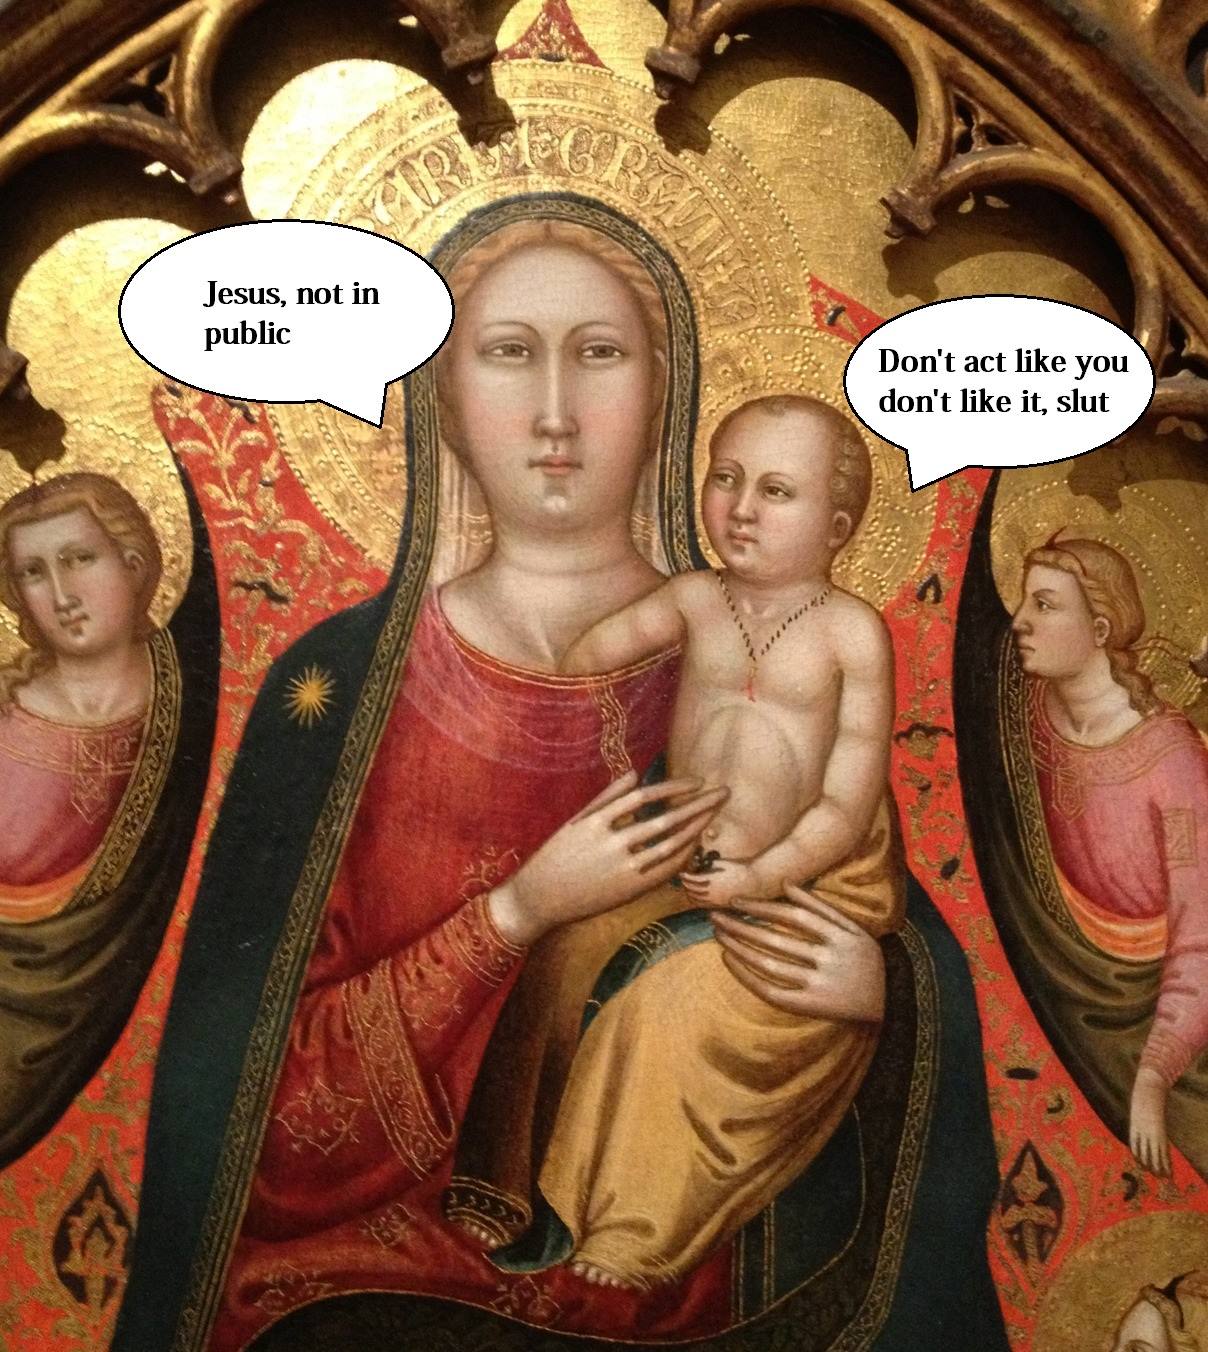 madonna and child paintings - Jesus, not in public Don't act you don't it, slut